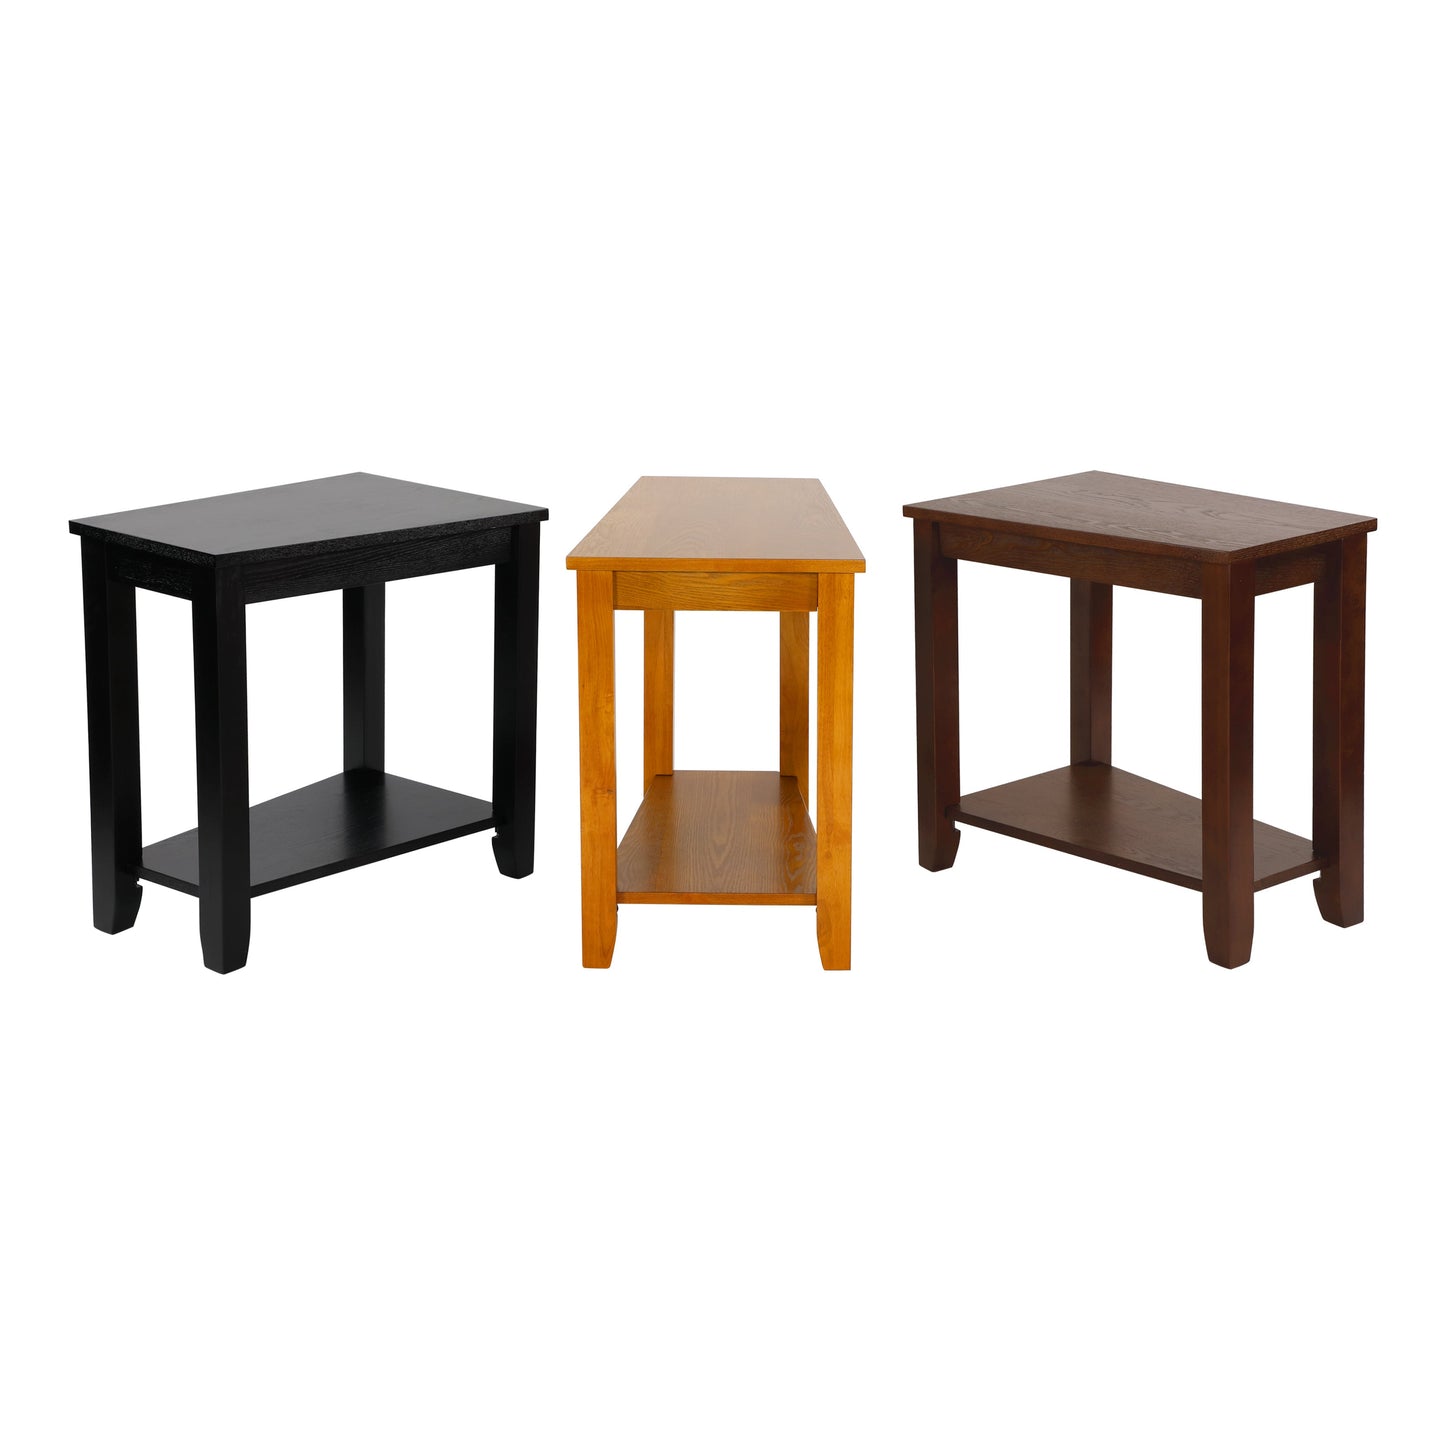 Elwell Black Chairside Table